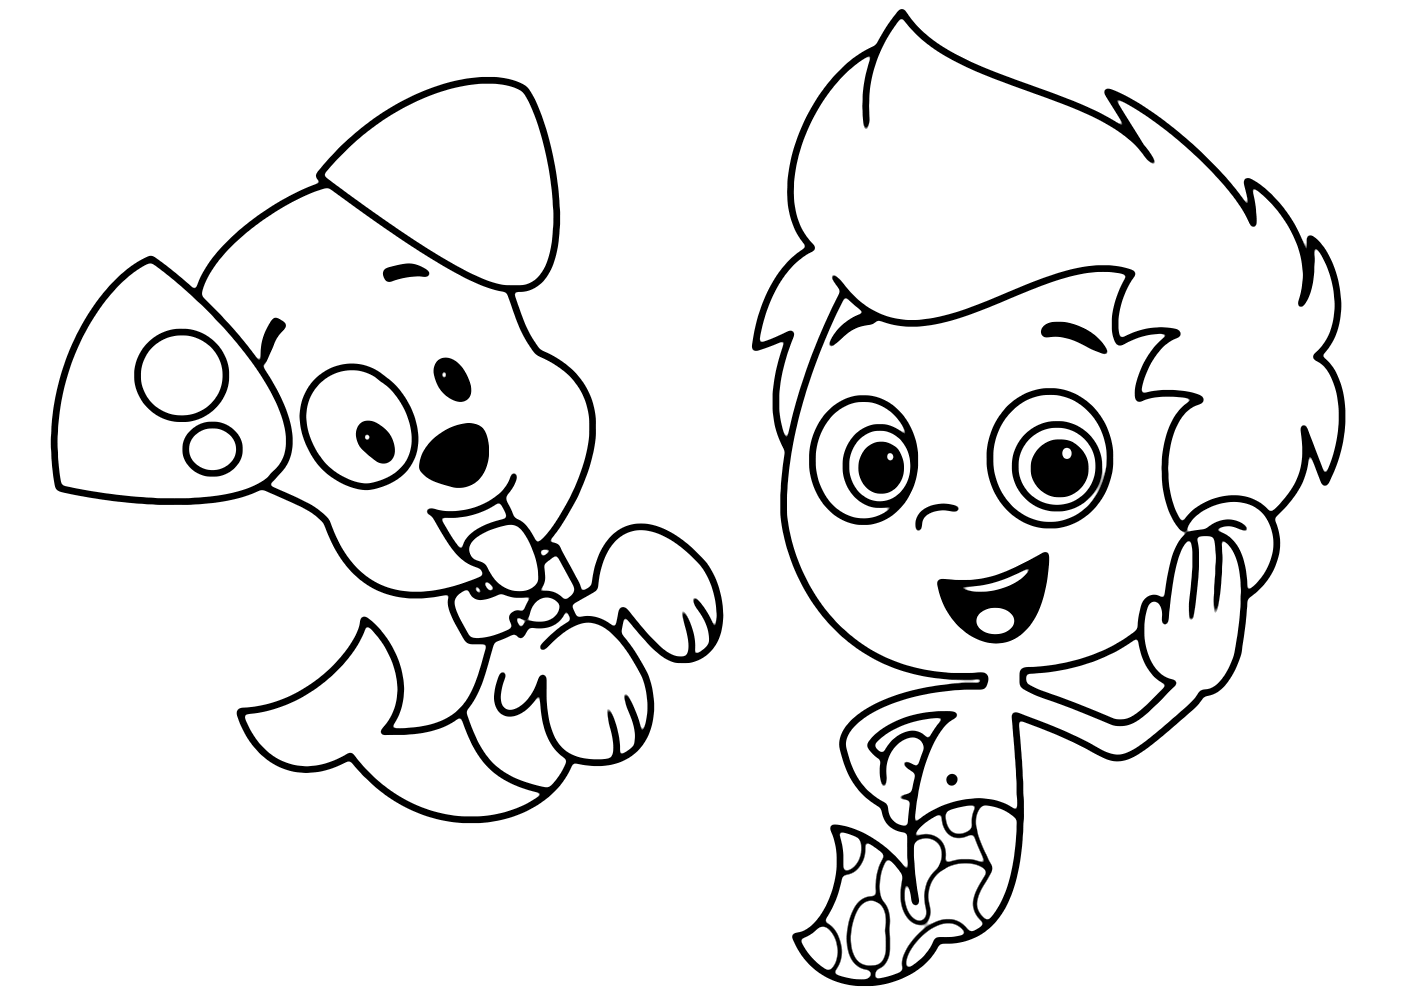 Bubble Guppies Coloring Pages: Printable PDF